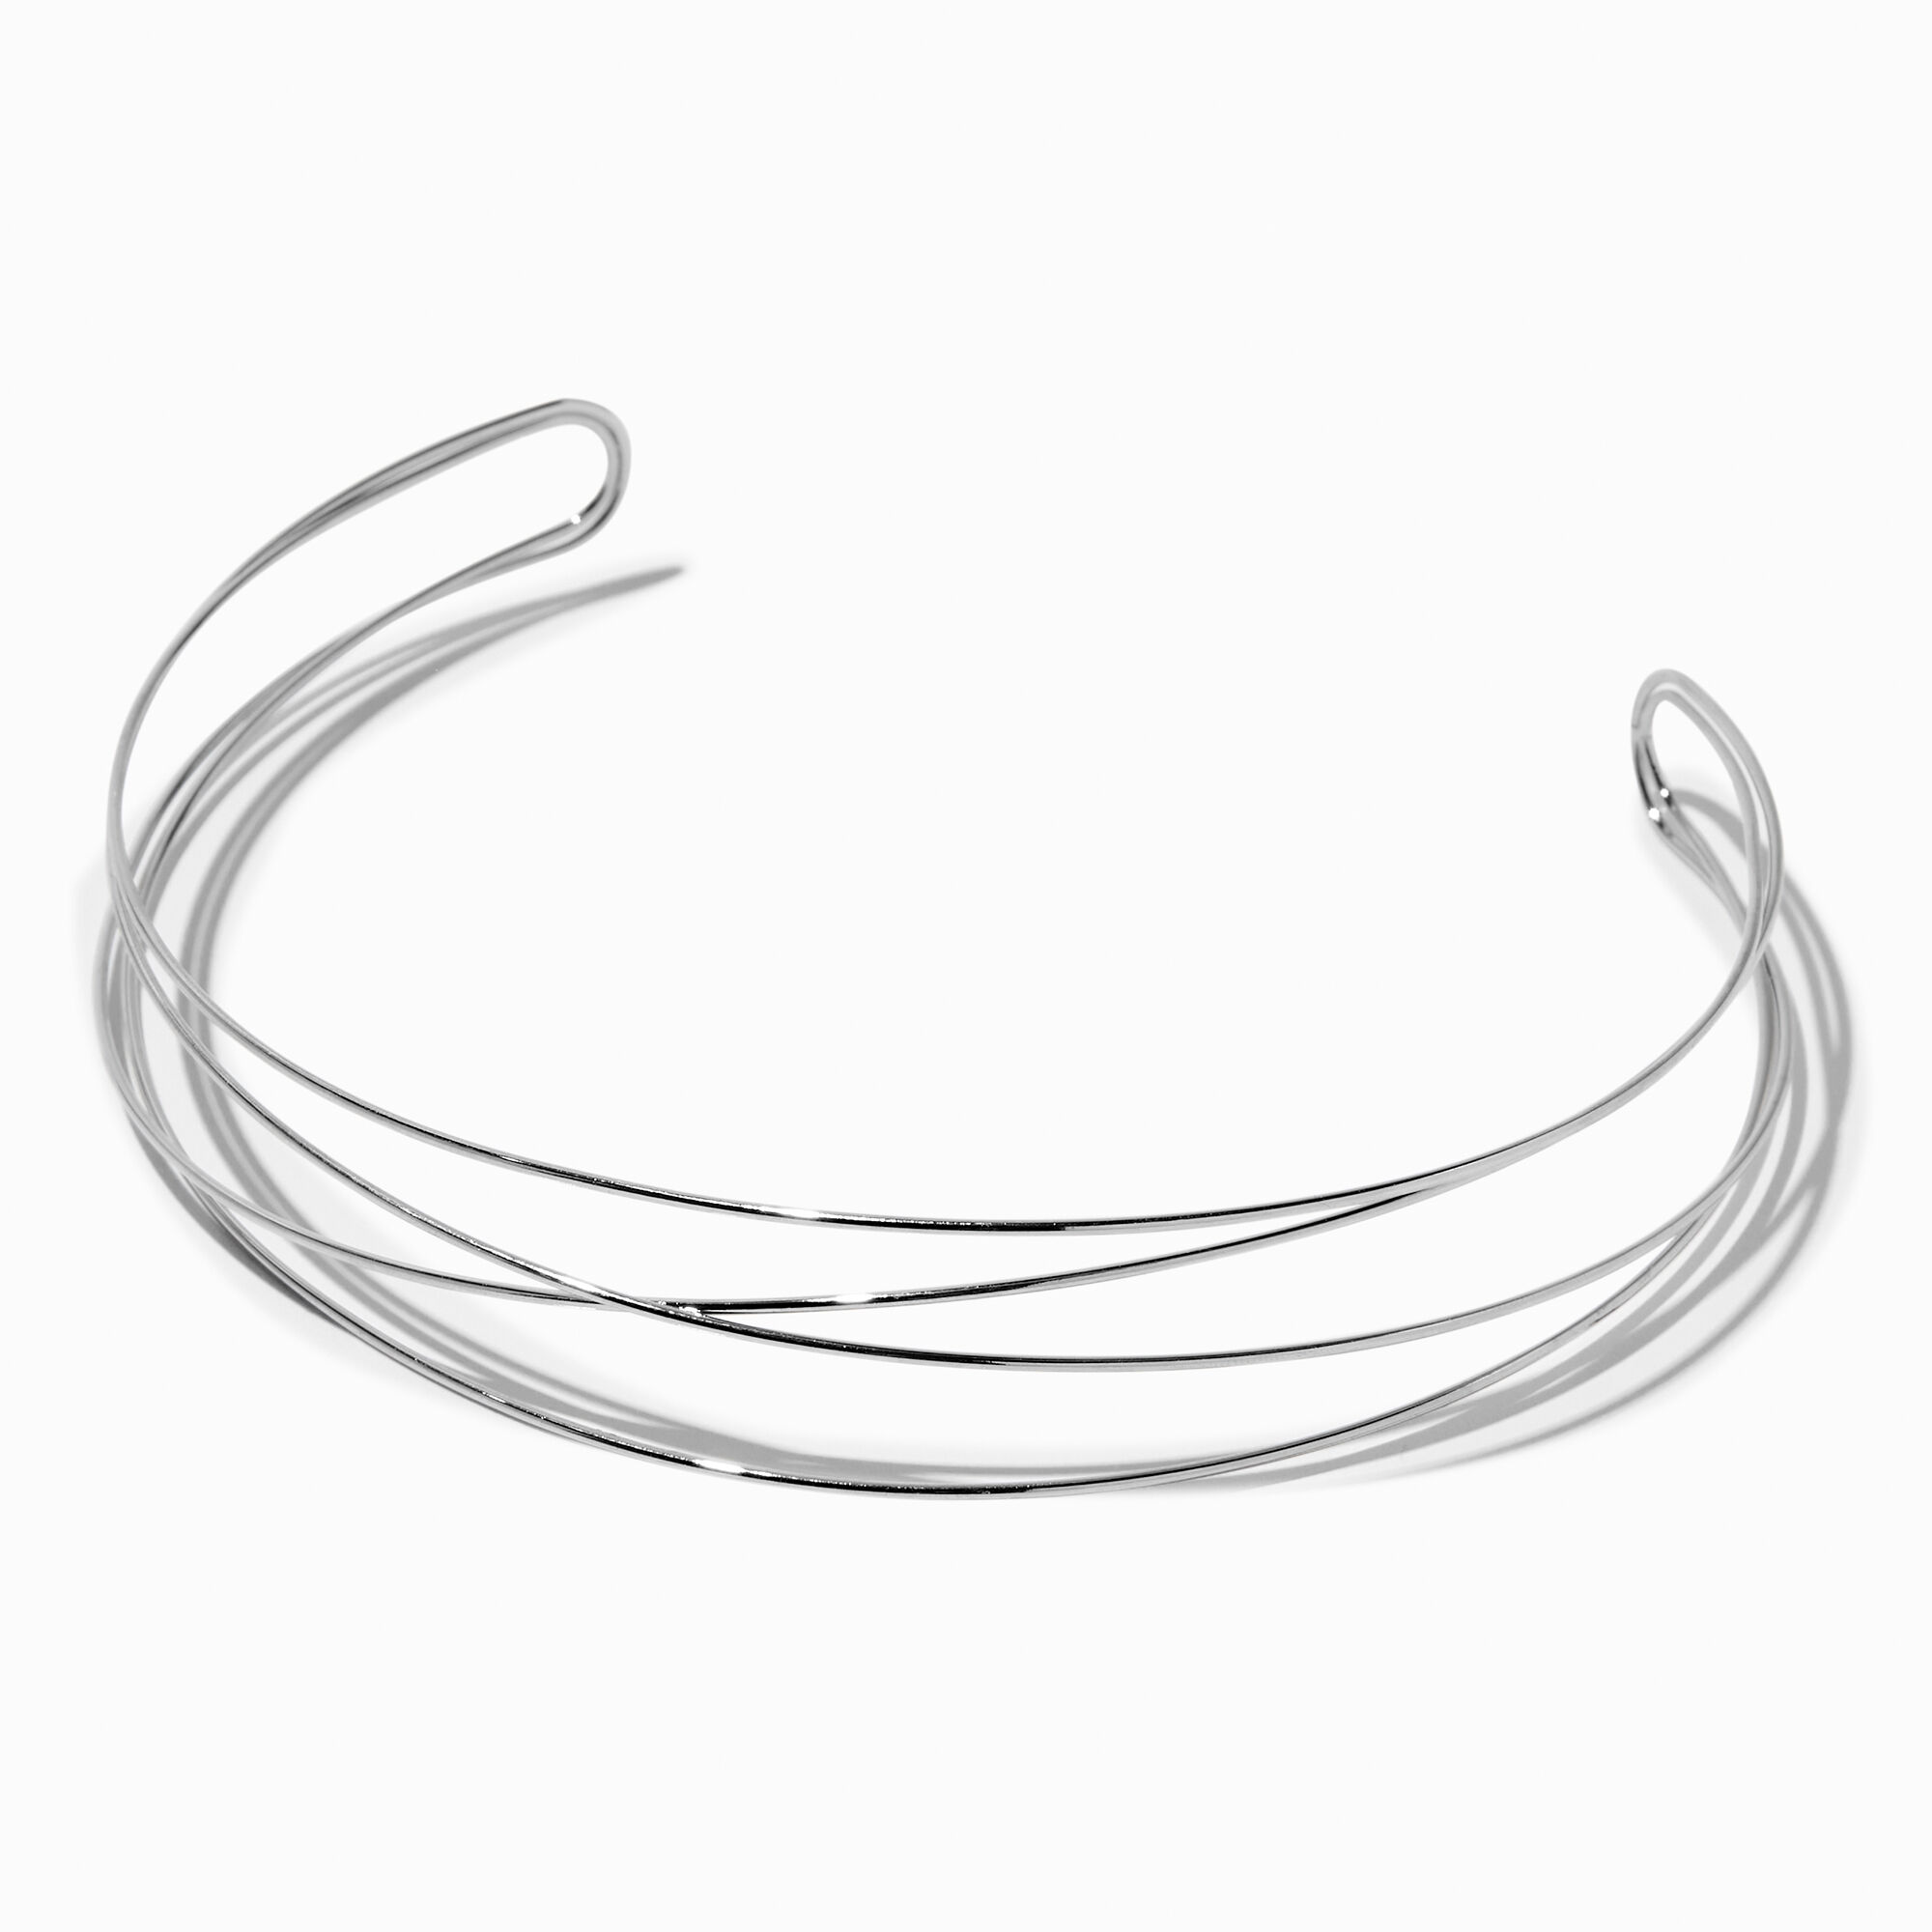 View Claires Tone CrissCross Wire Cuff Choker Necklace Silver information